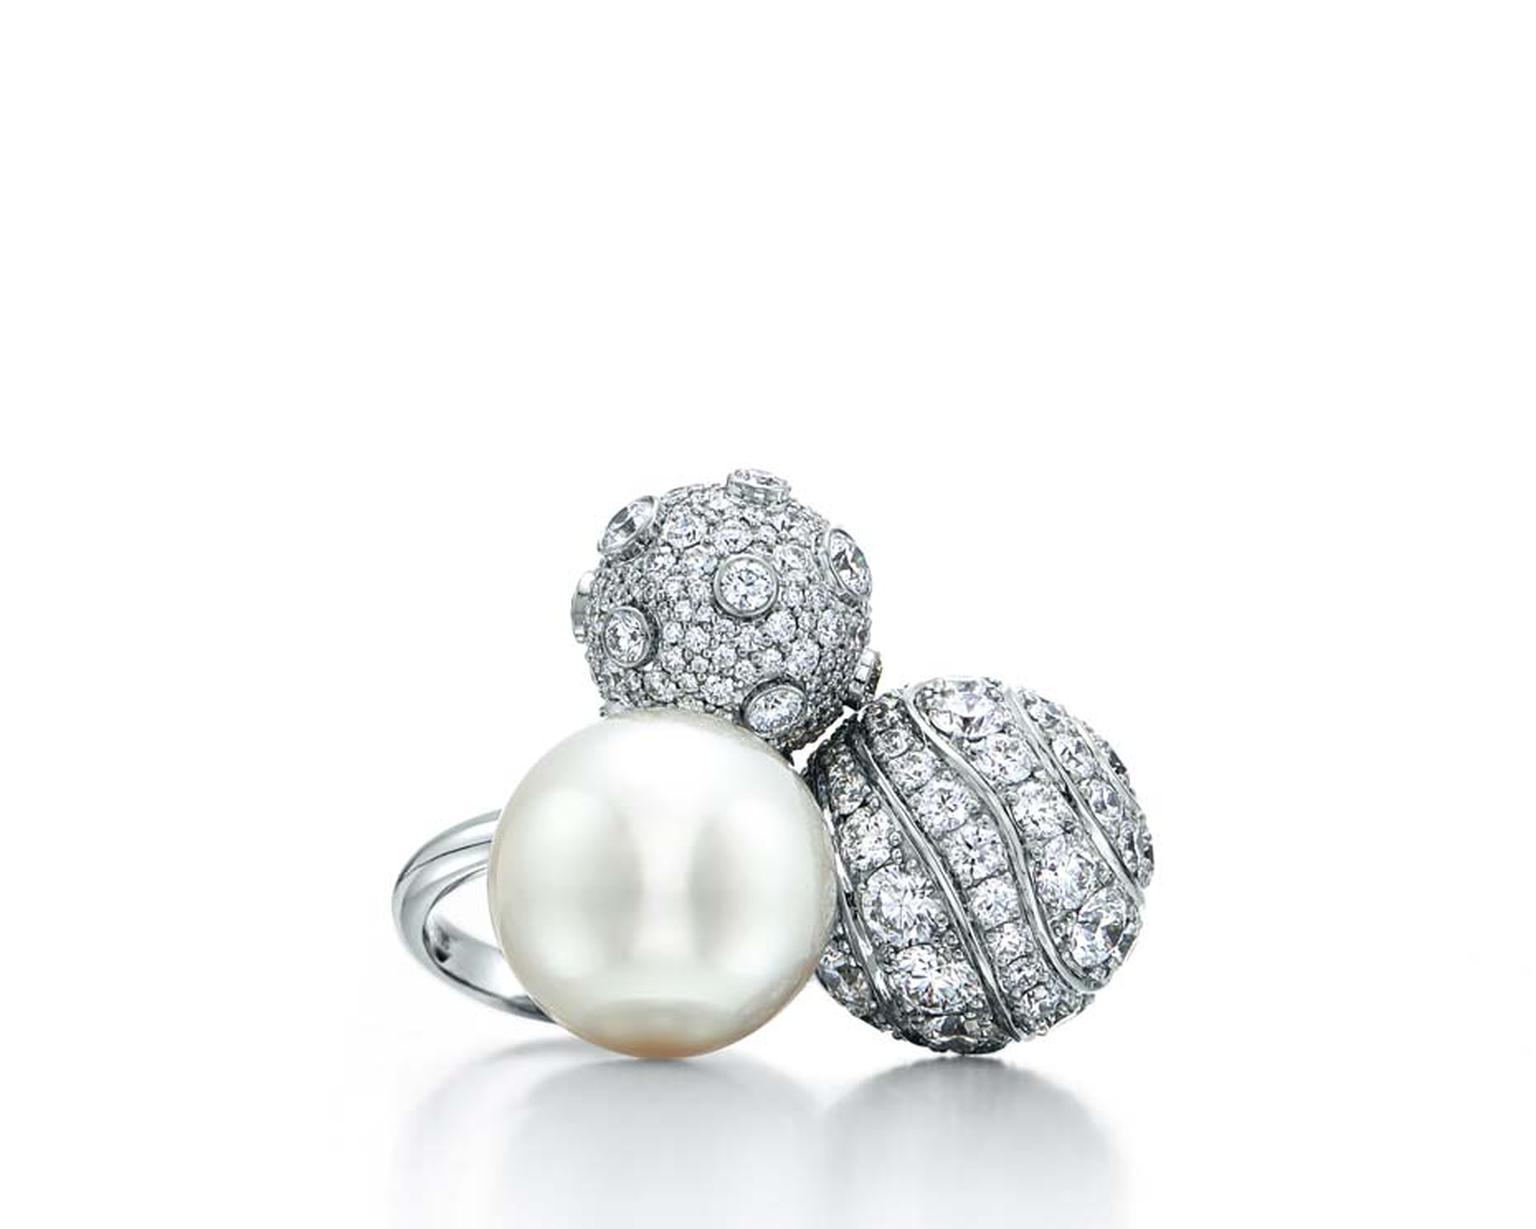 Cultured South Sea pearl and diamond ring from the Tiffany & Co. 2015 Blue Book collection.